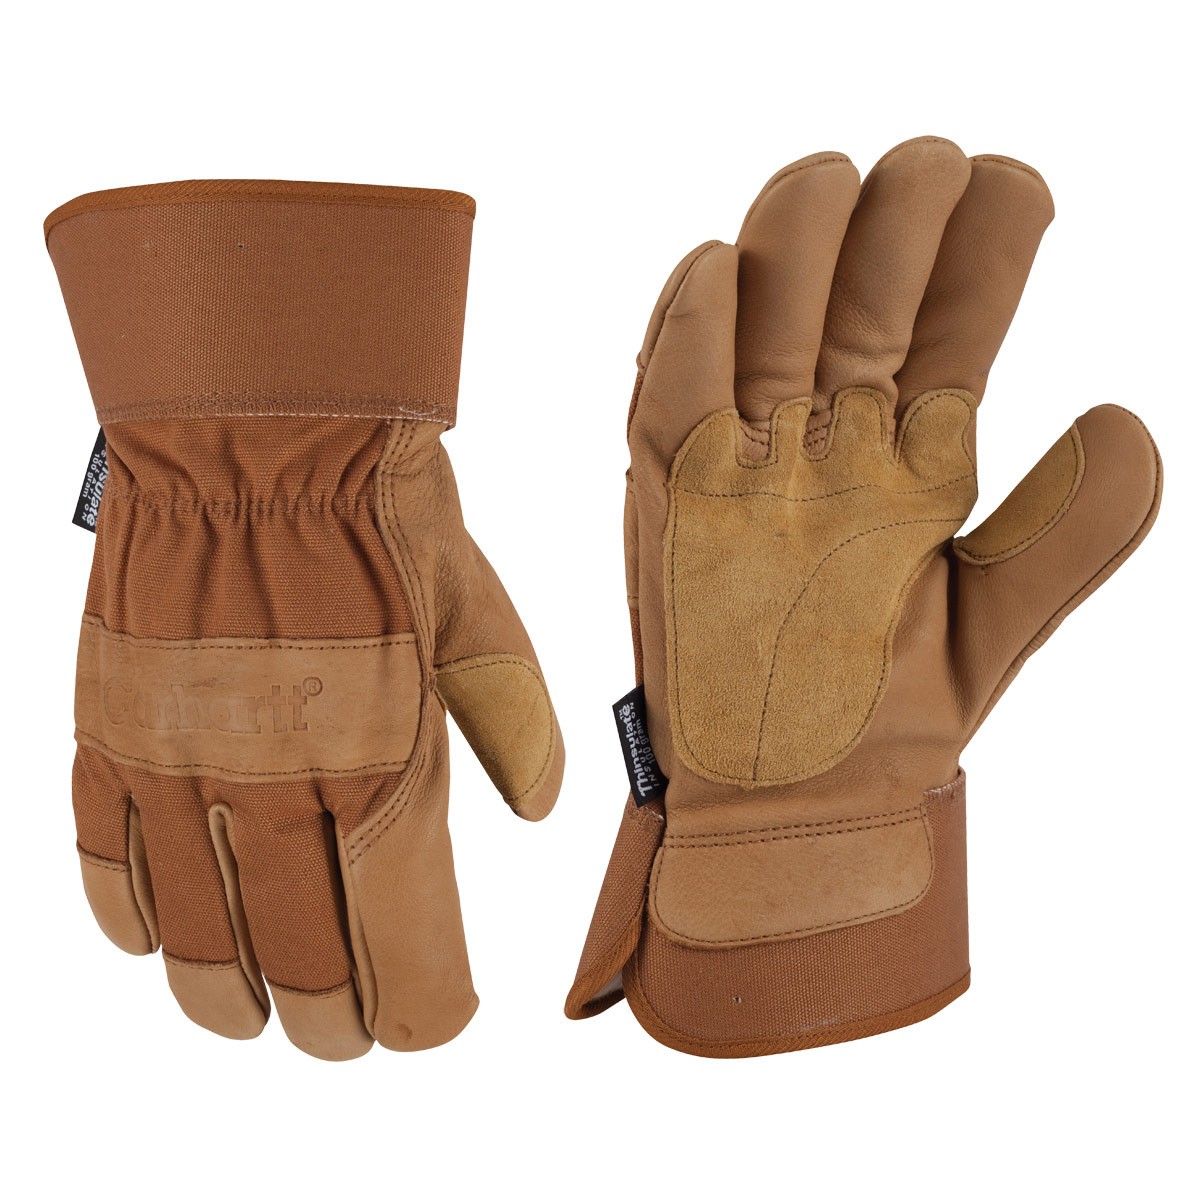 Carhartt Work Gloves Product Image